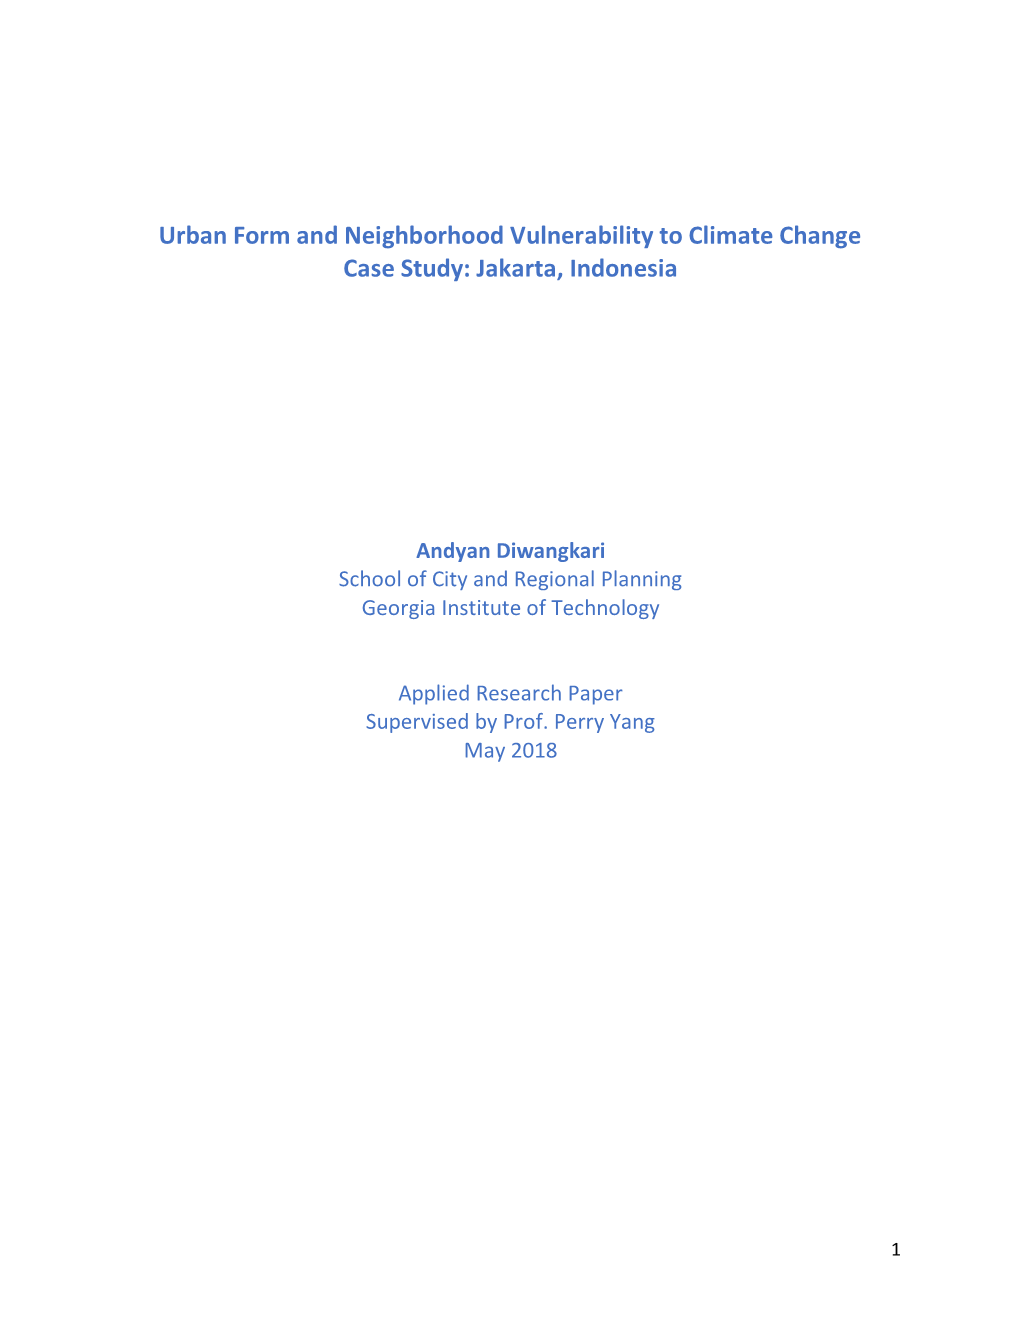 Urban Form and Neighborhood Vulnerability to Climate Change Case Study: Jakarta, Indonesia